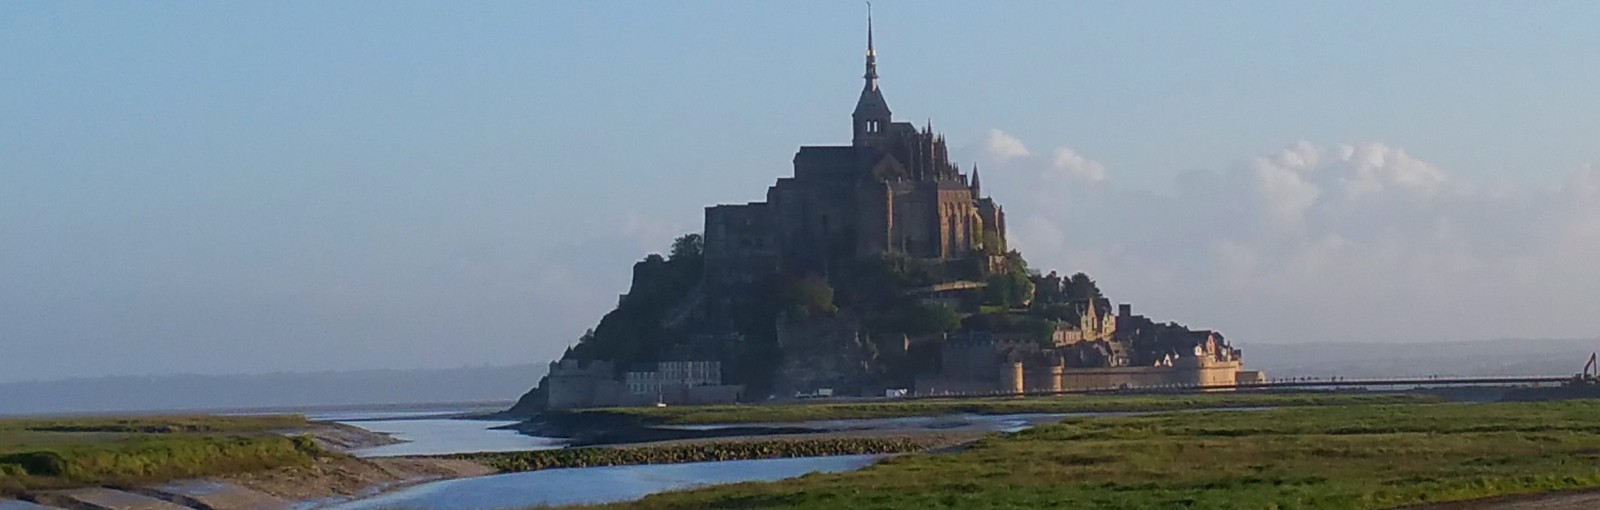 Tours Overnight to the Mont-Saint-Michel with a hike across the bay - Brittany - Multiday tours from Paris